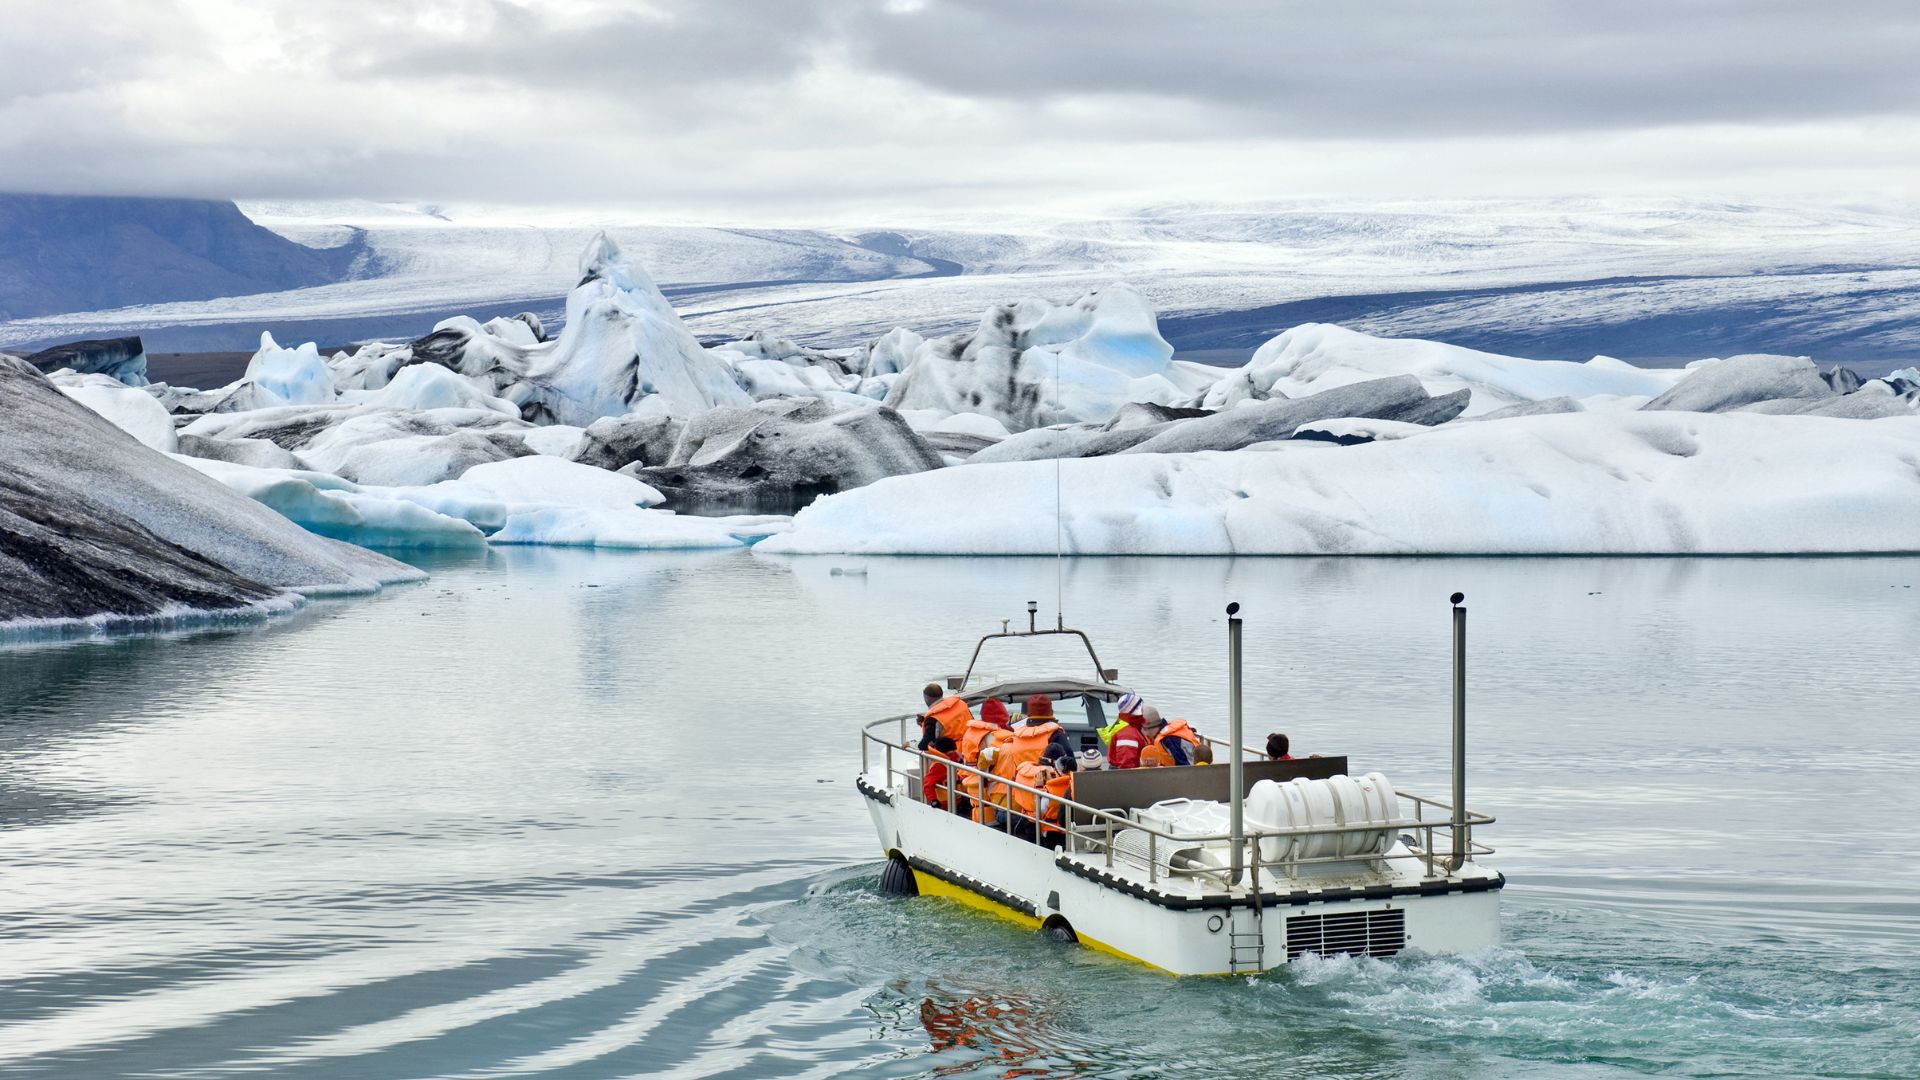 Boat tour on the glacier lagoon in Iceland